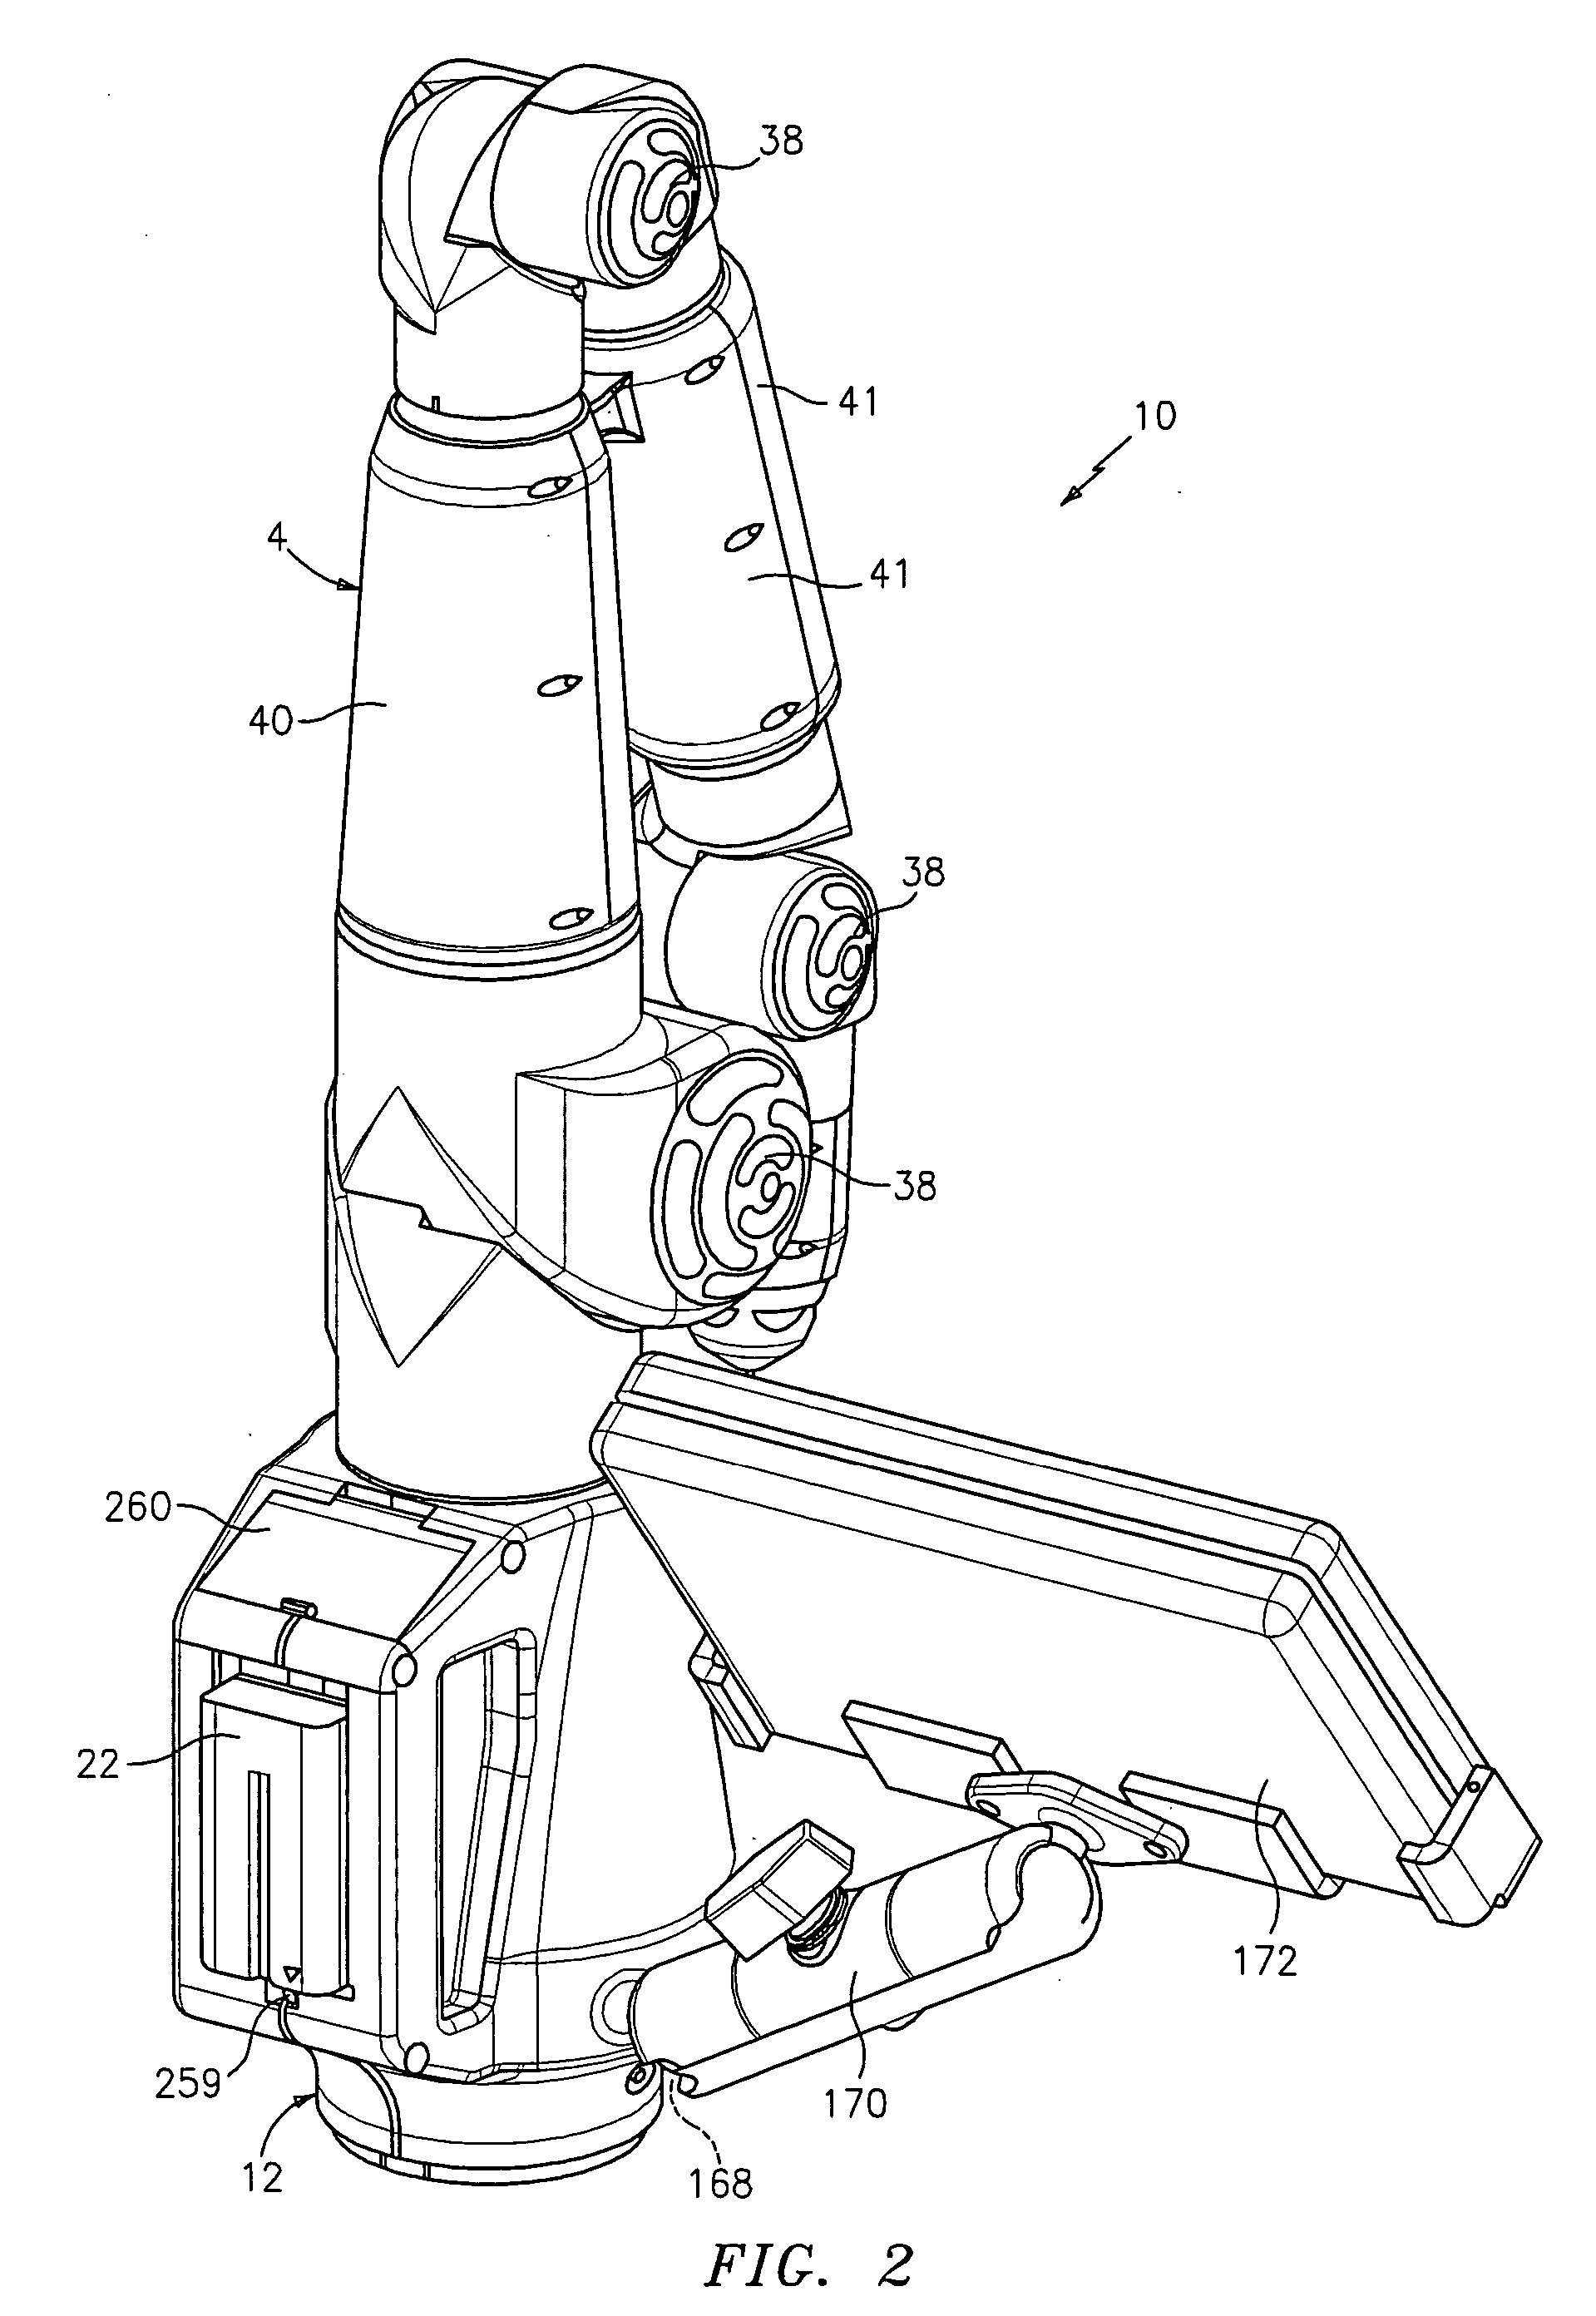 Method for improving measurement accuracy of a protable coordinate measurement machine